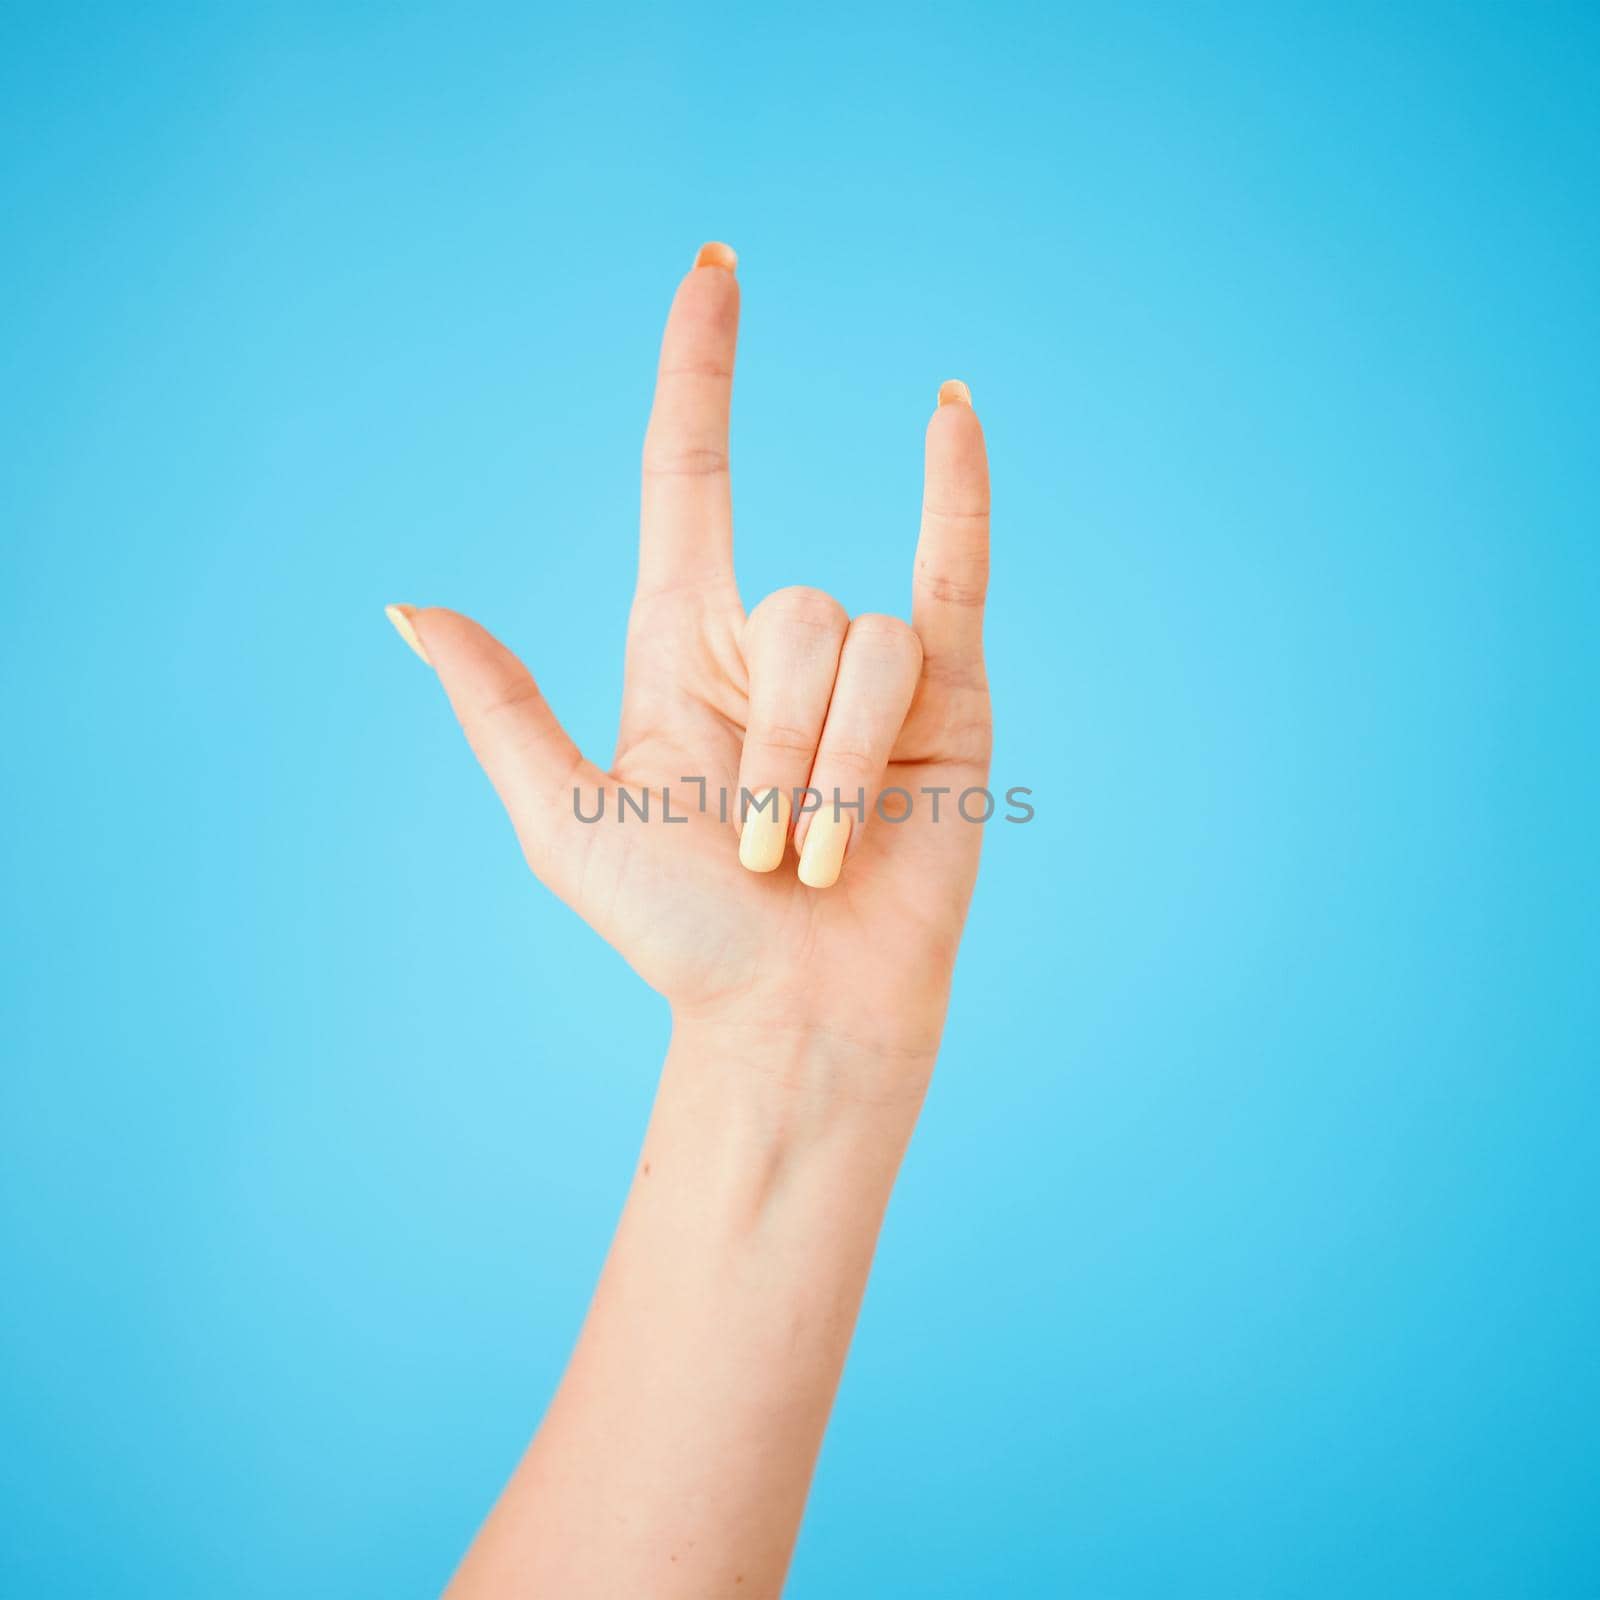 Studio shot of an unrecognisable woman making a horn sign against a blue background.